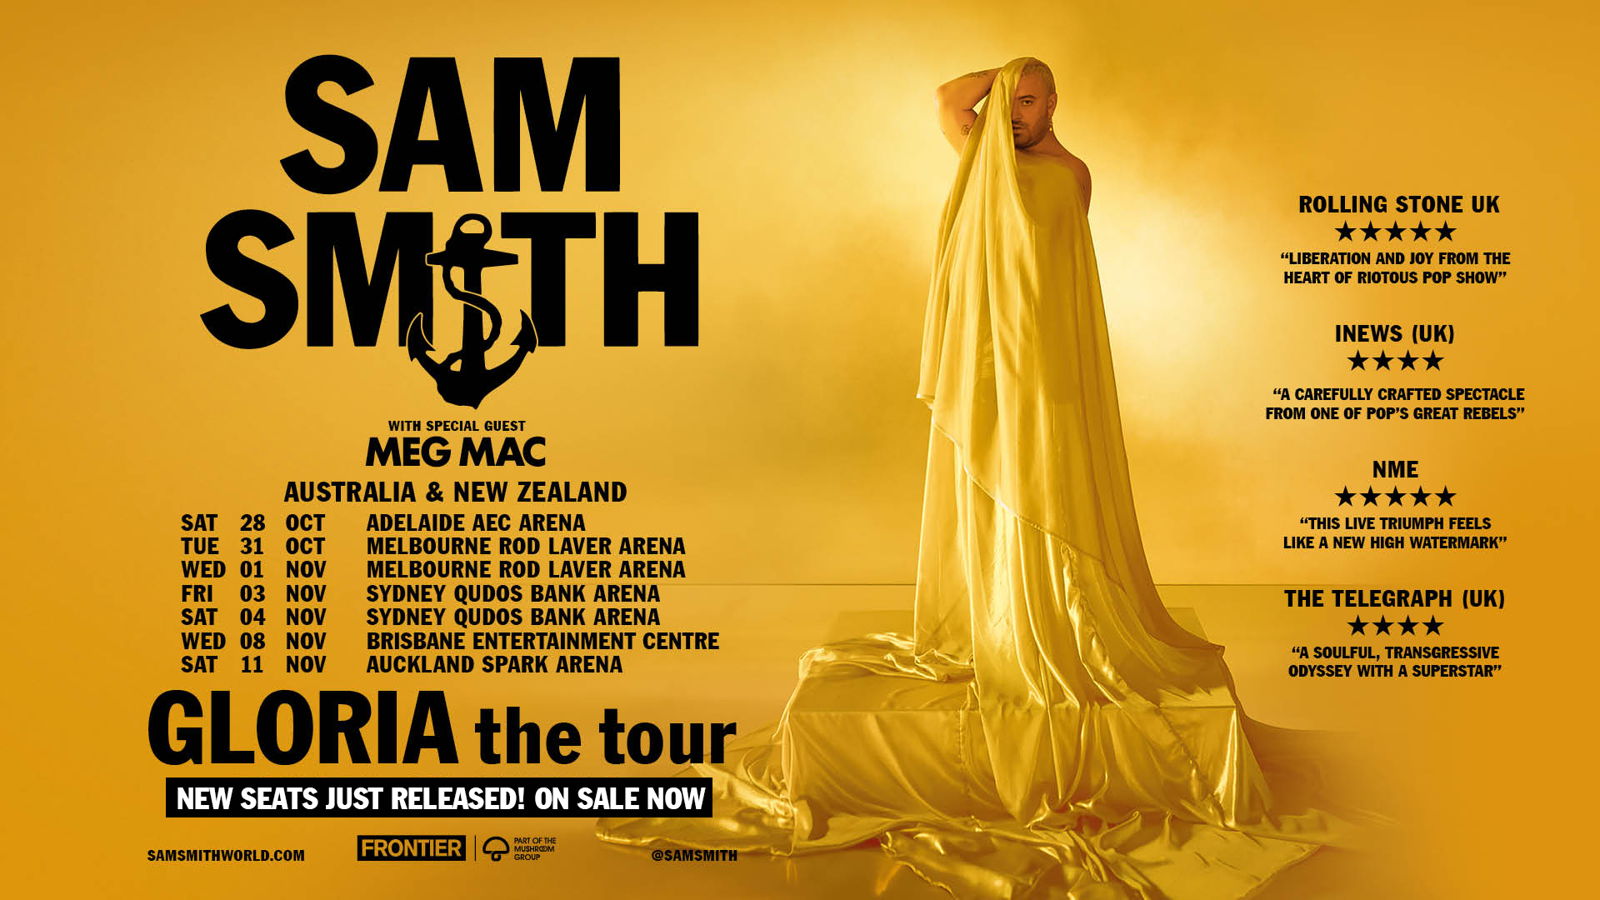 SAM SMITH (UK): NEW TICKETS JUST RELEASED ACROSS ALL GLORIA THE TOUR AUSTRALIA & NEW ZEALAND SHOWS